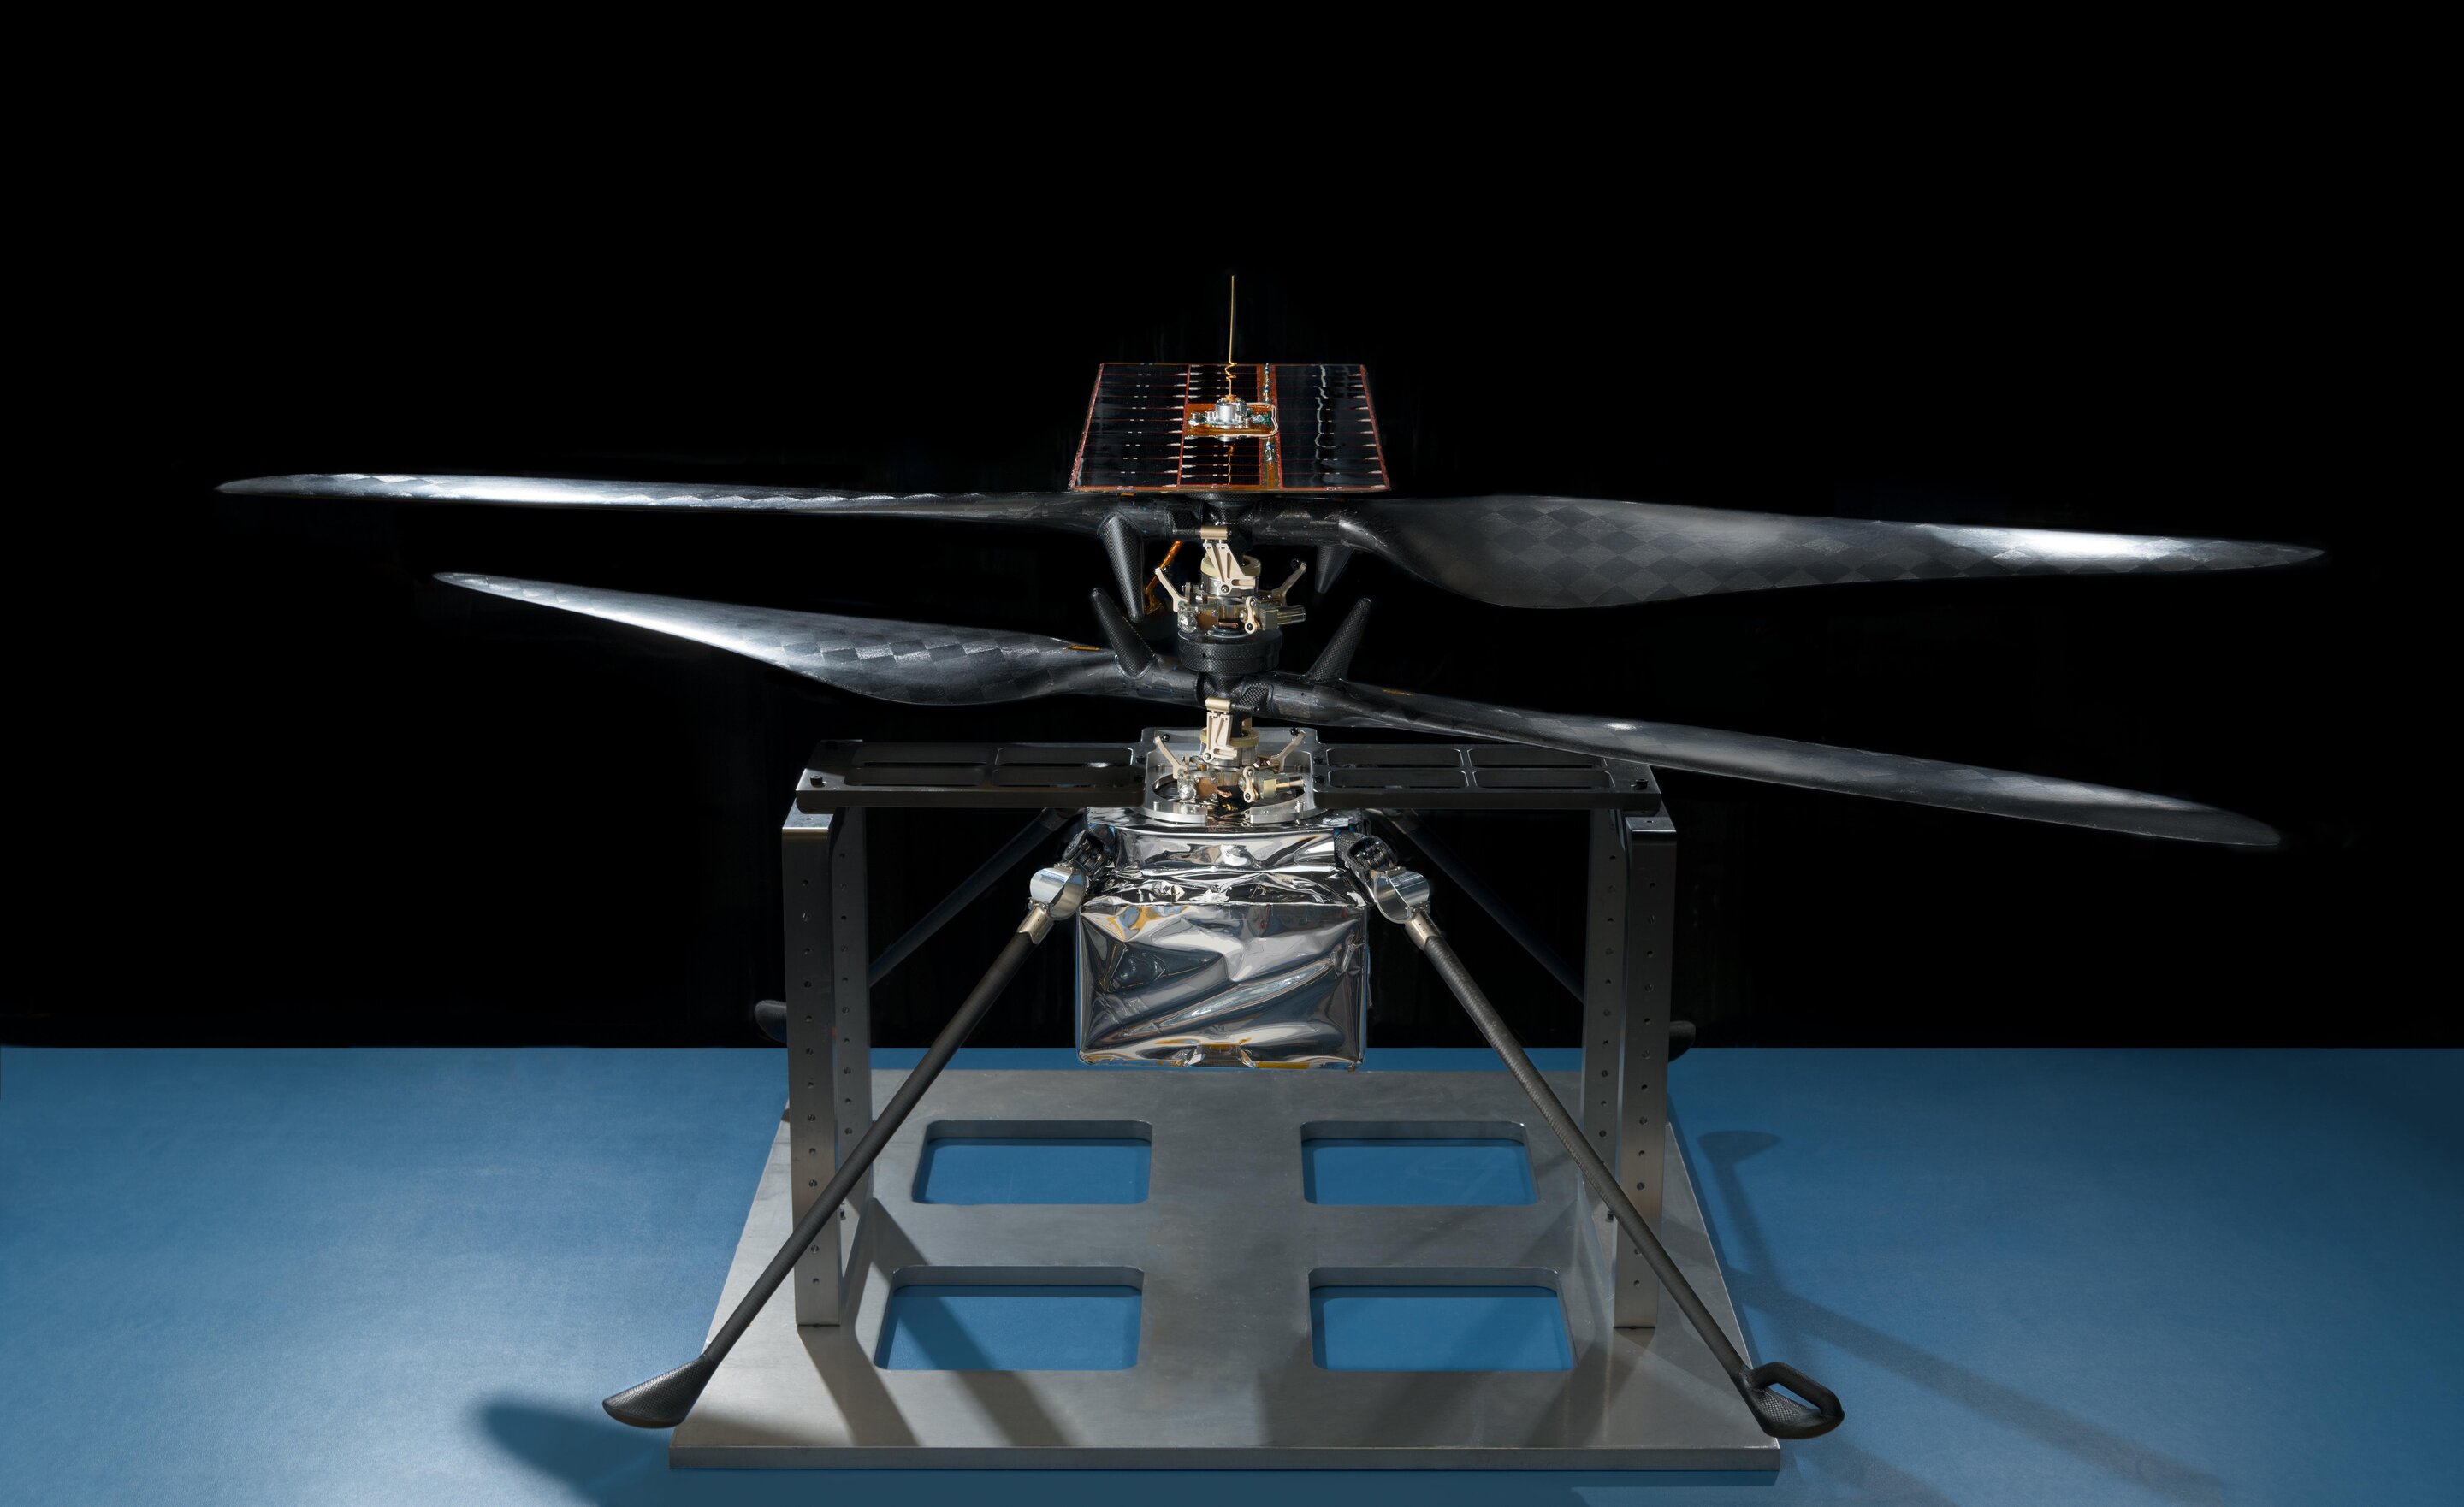 NASA successfully tested quadcopter for Mars